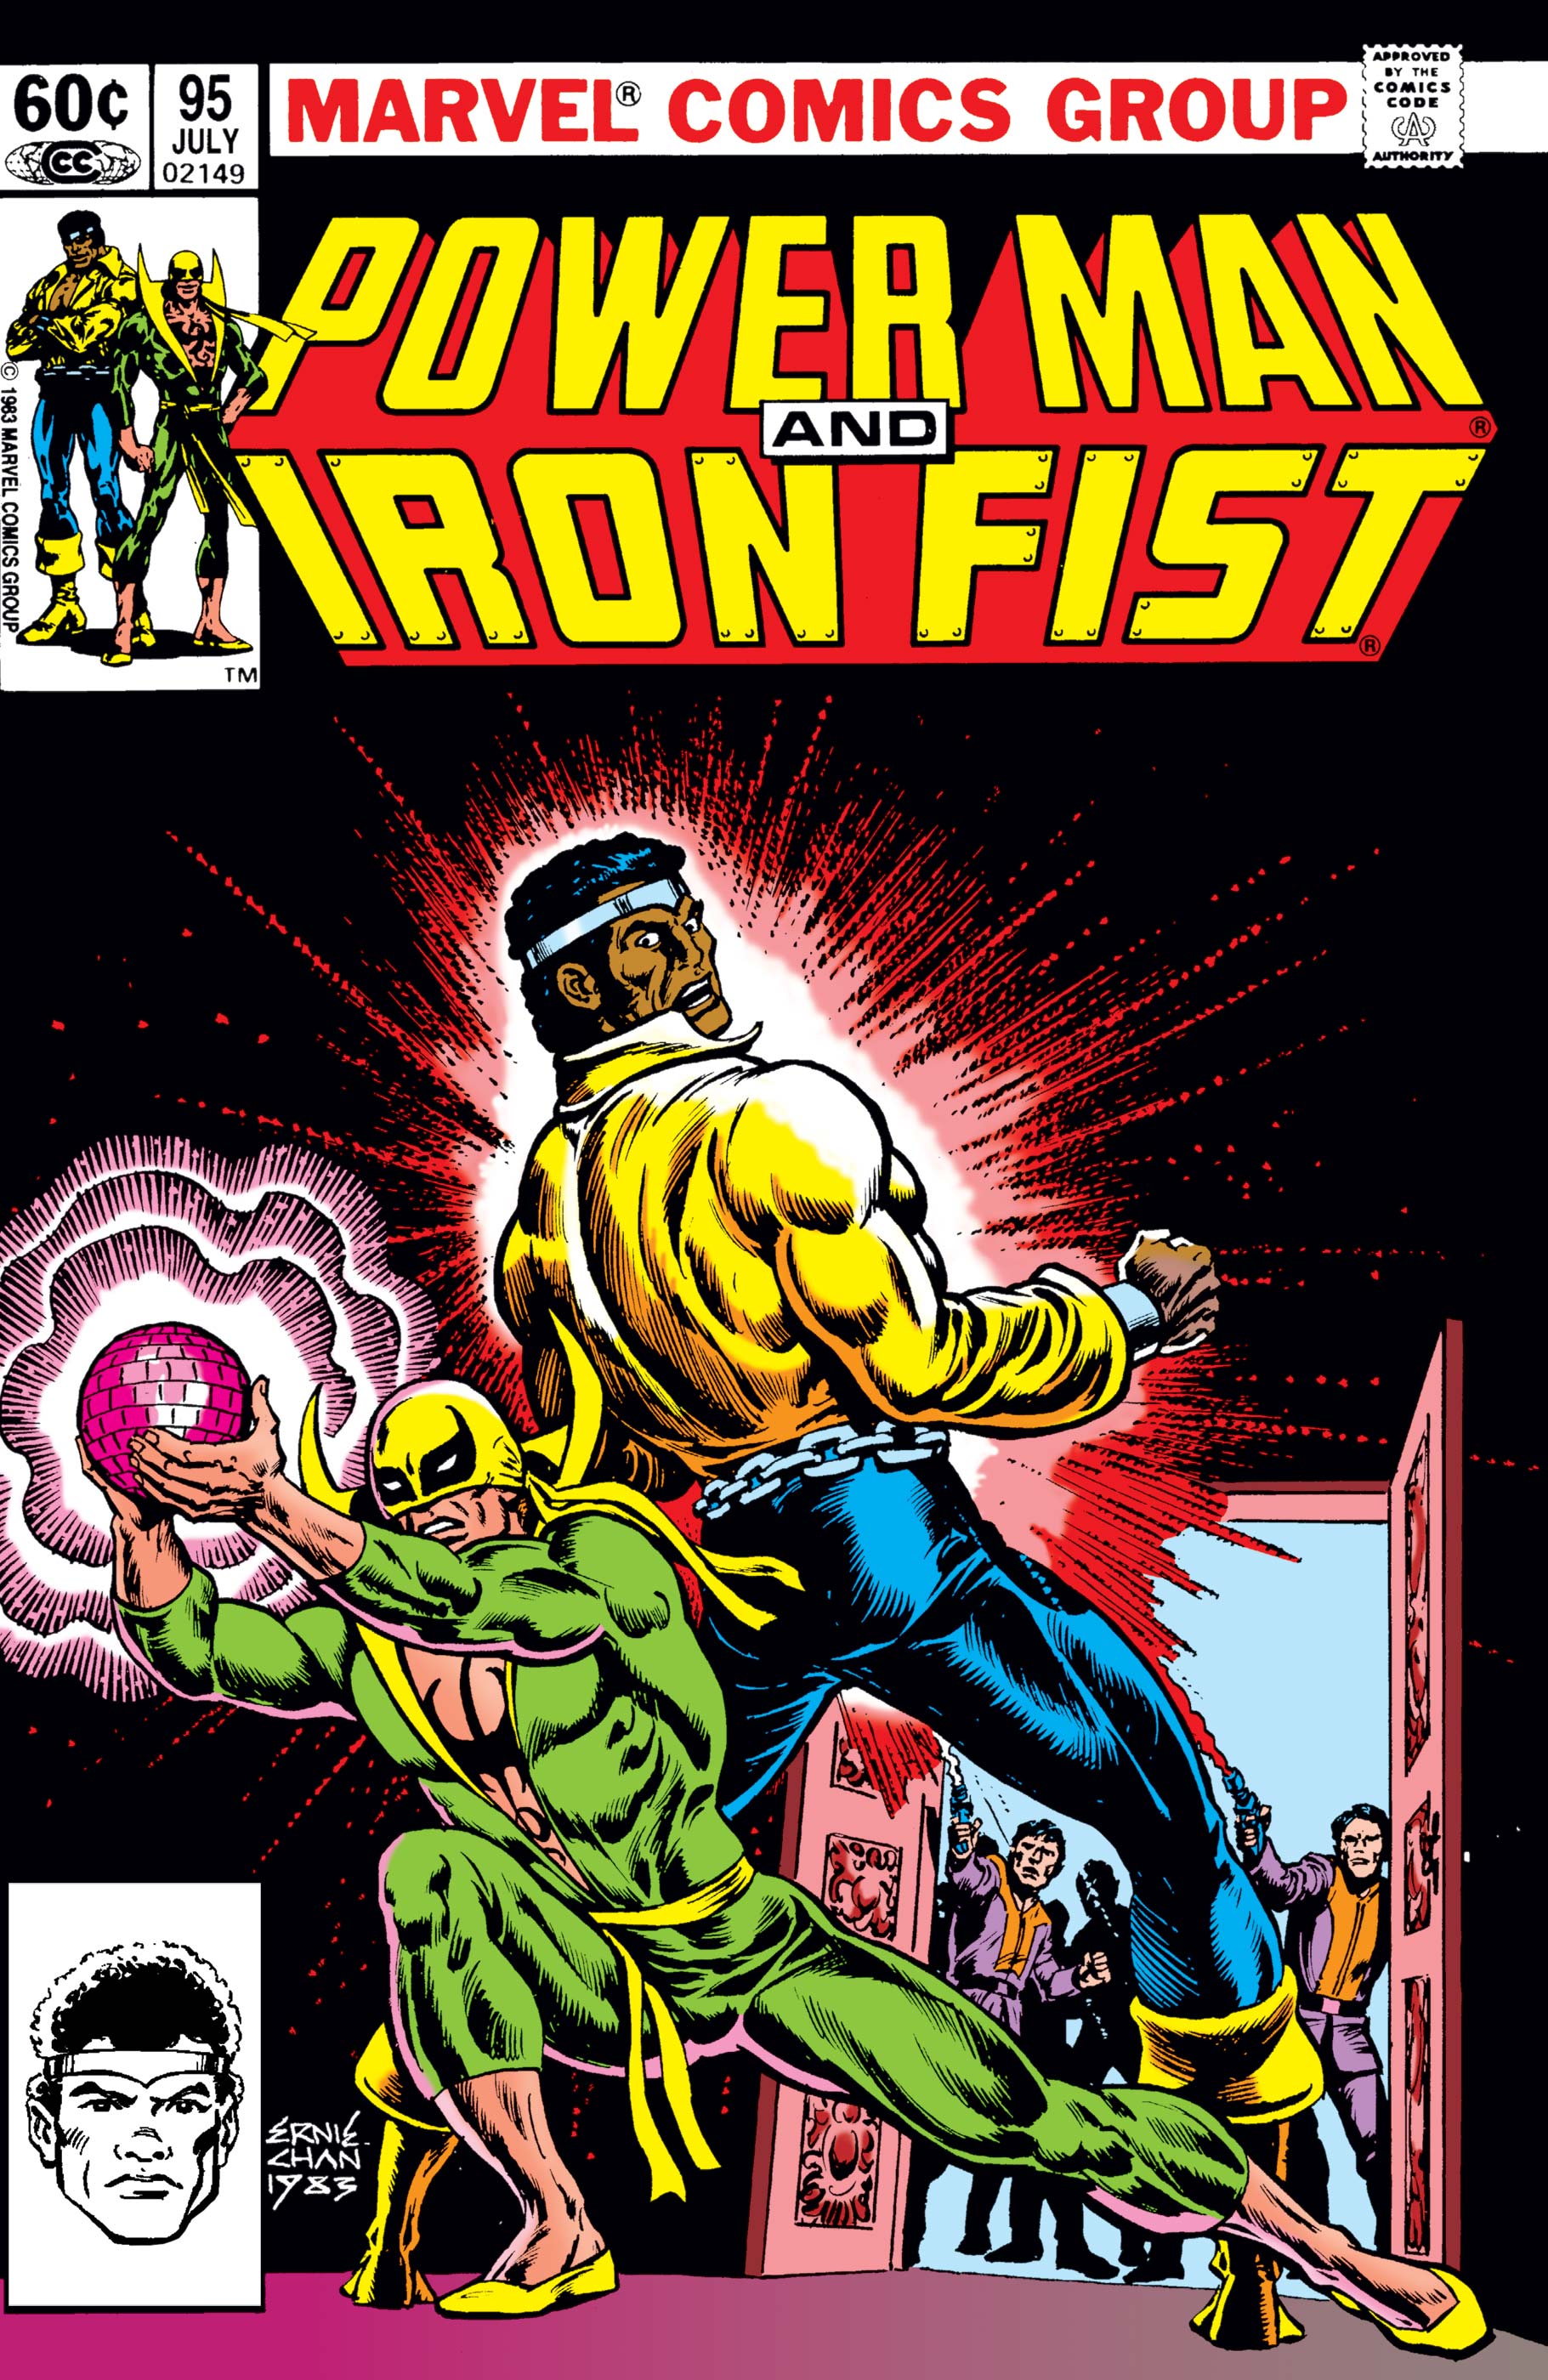 Power Man and Iron Fist (1978) #95